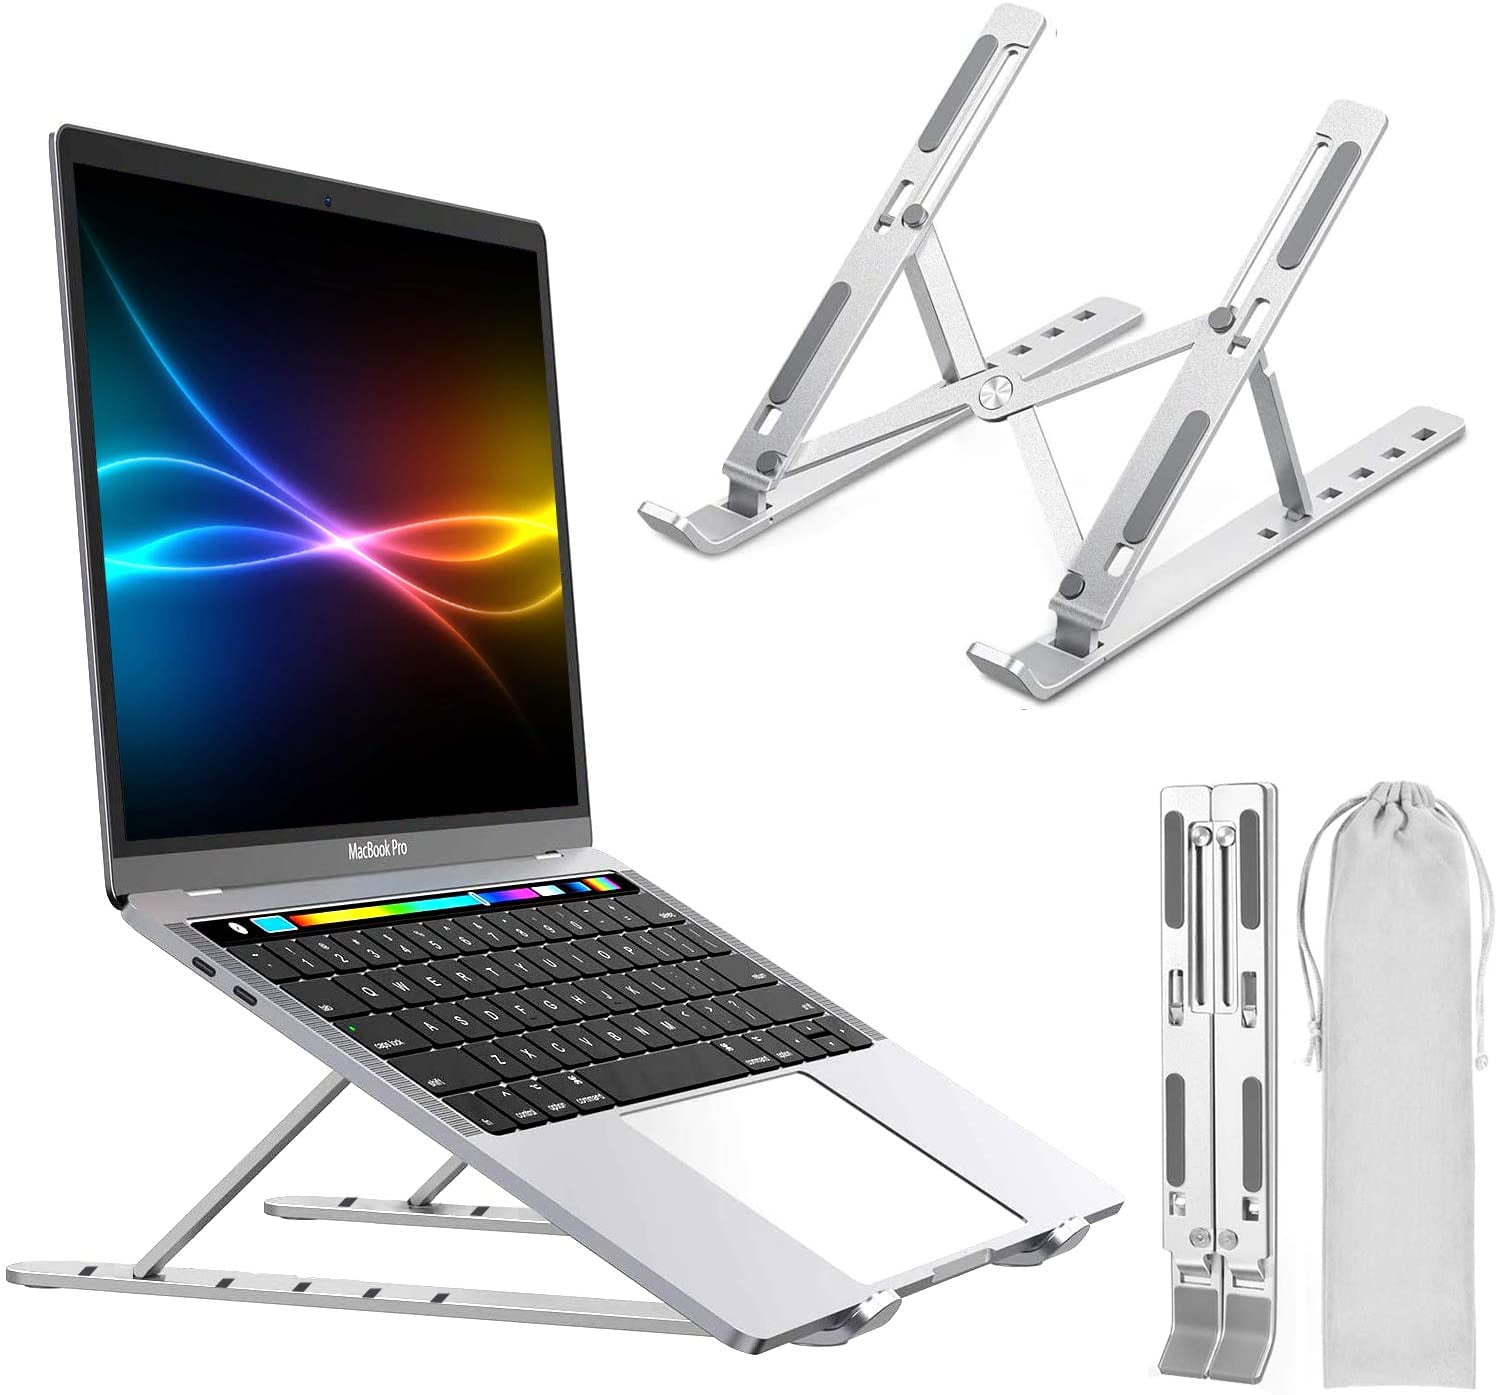 Ergonomic Portable Computer Stand,Aluminum Foldable Laptop Holder with Heat-Vent,Compatible for Mac,Notebook,MacBook Pro/Air,Lenovo,Dell More10-17 Laptop Silver Adjustable Laptop Stand